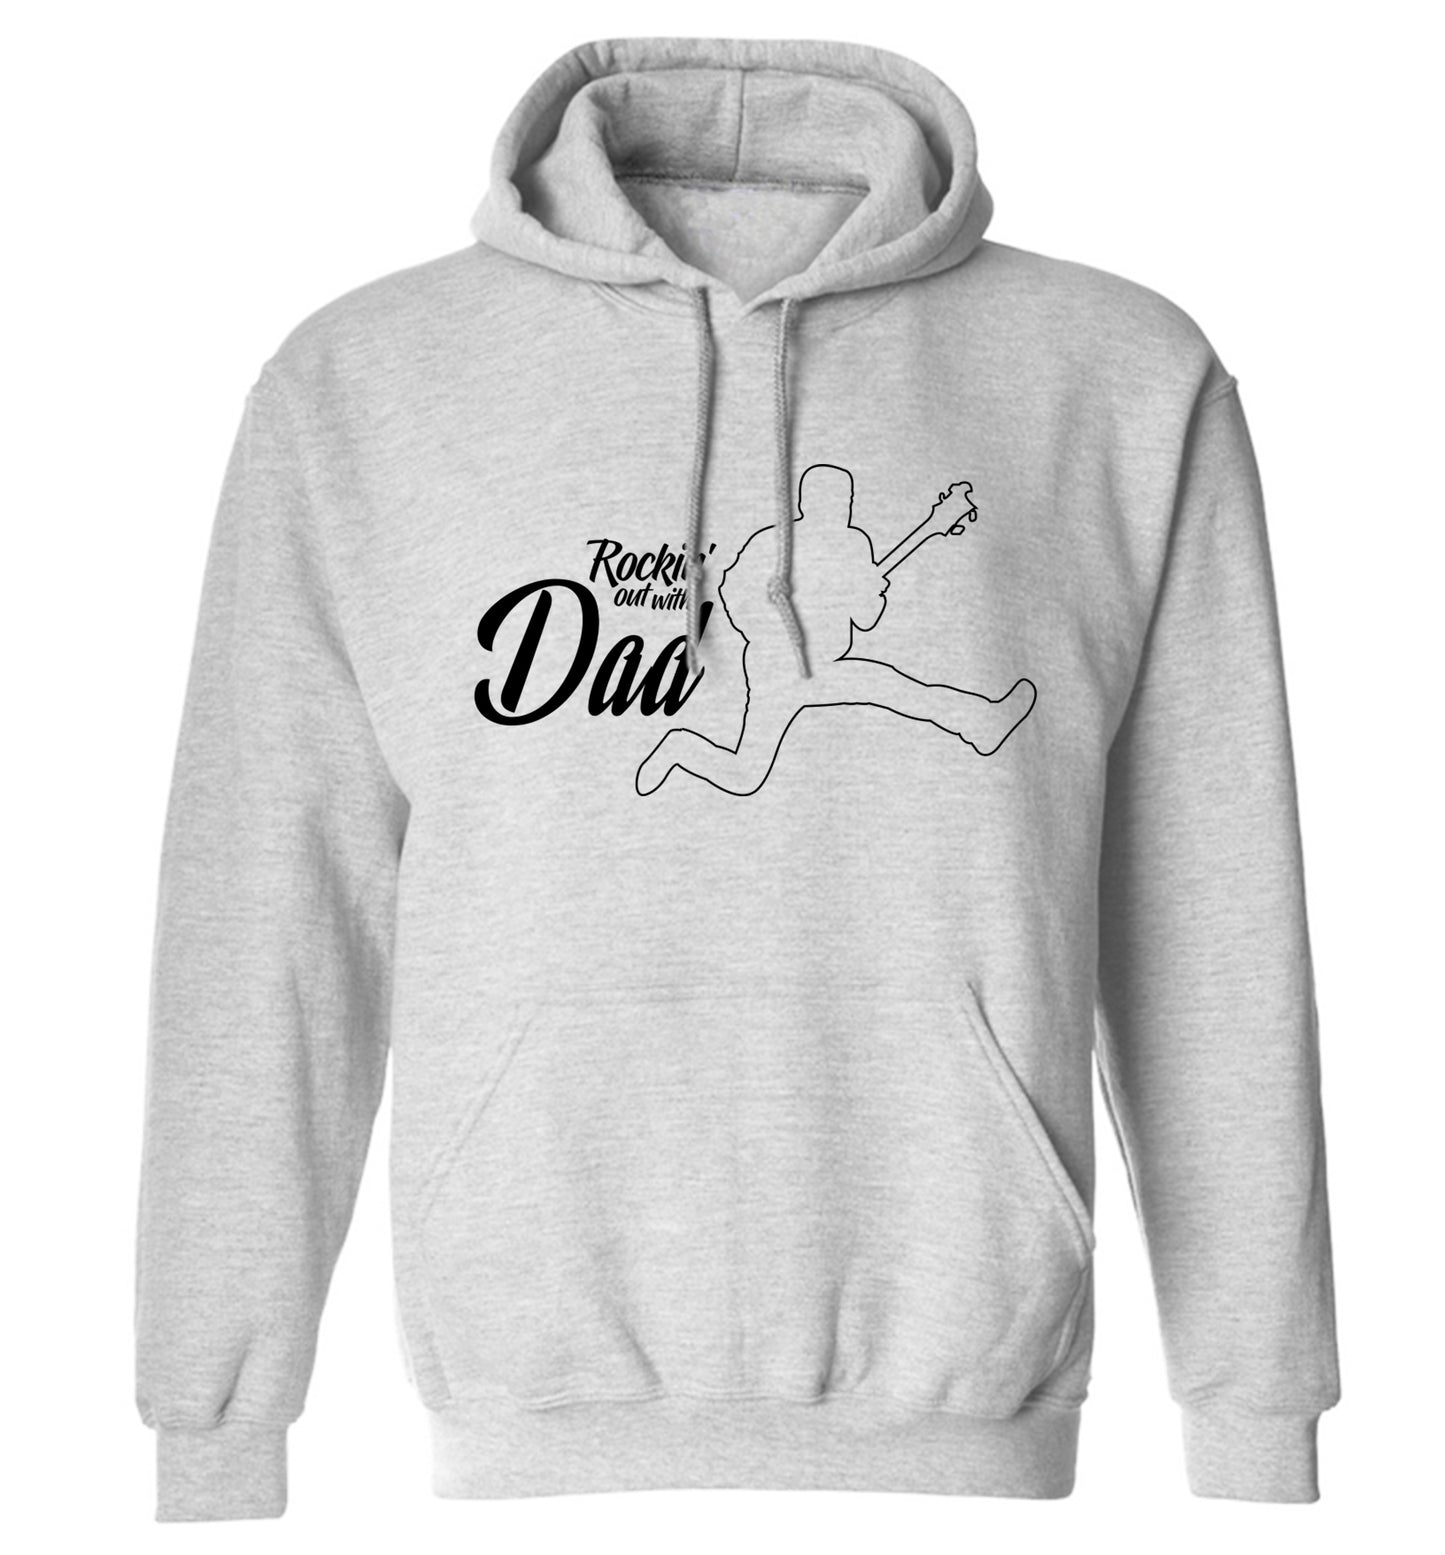 Rockin out with dad adults unisex grey hoodie 2XL